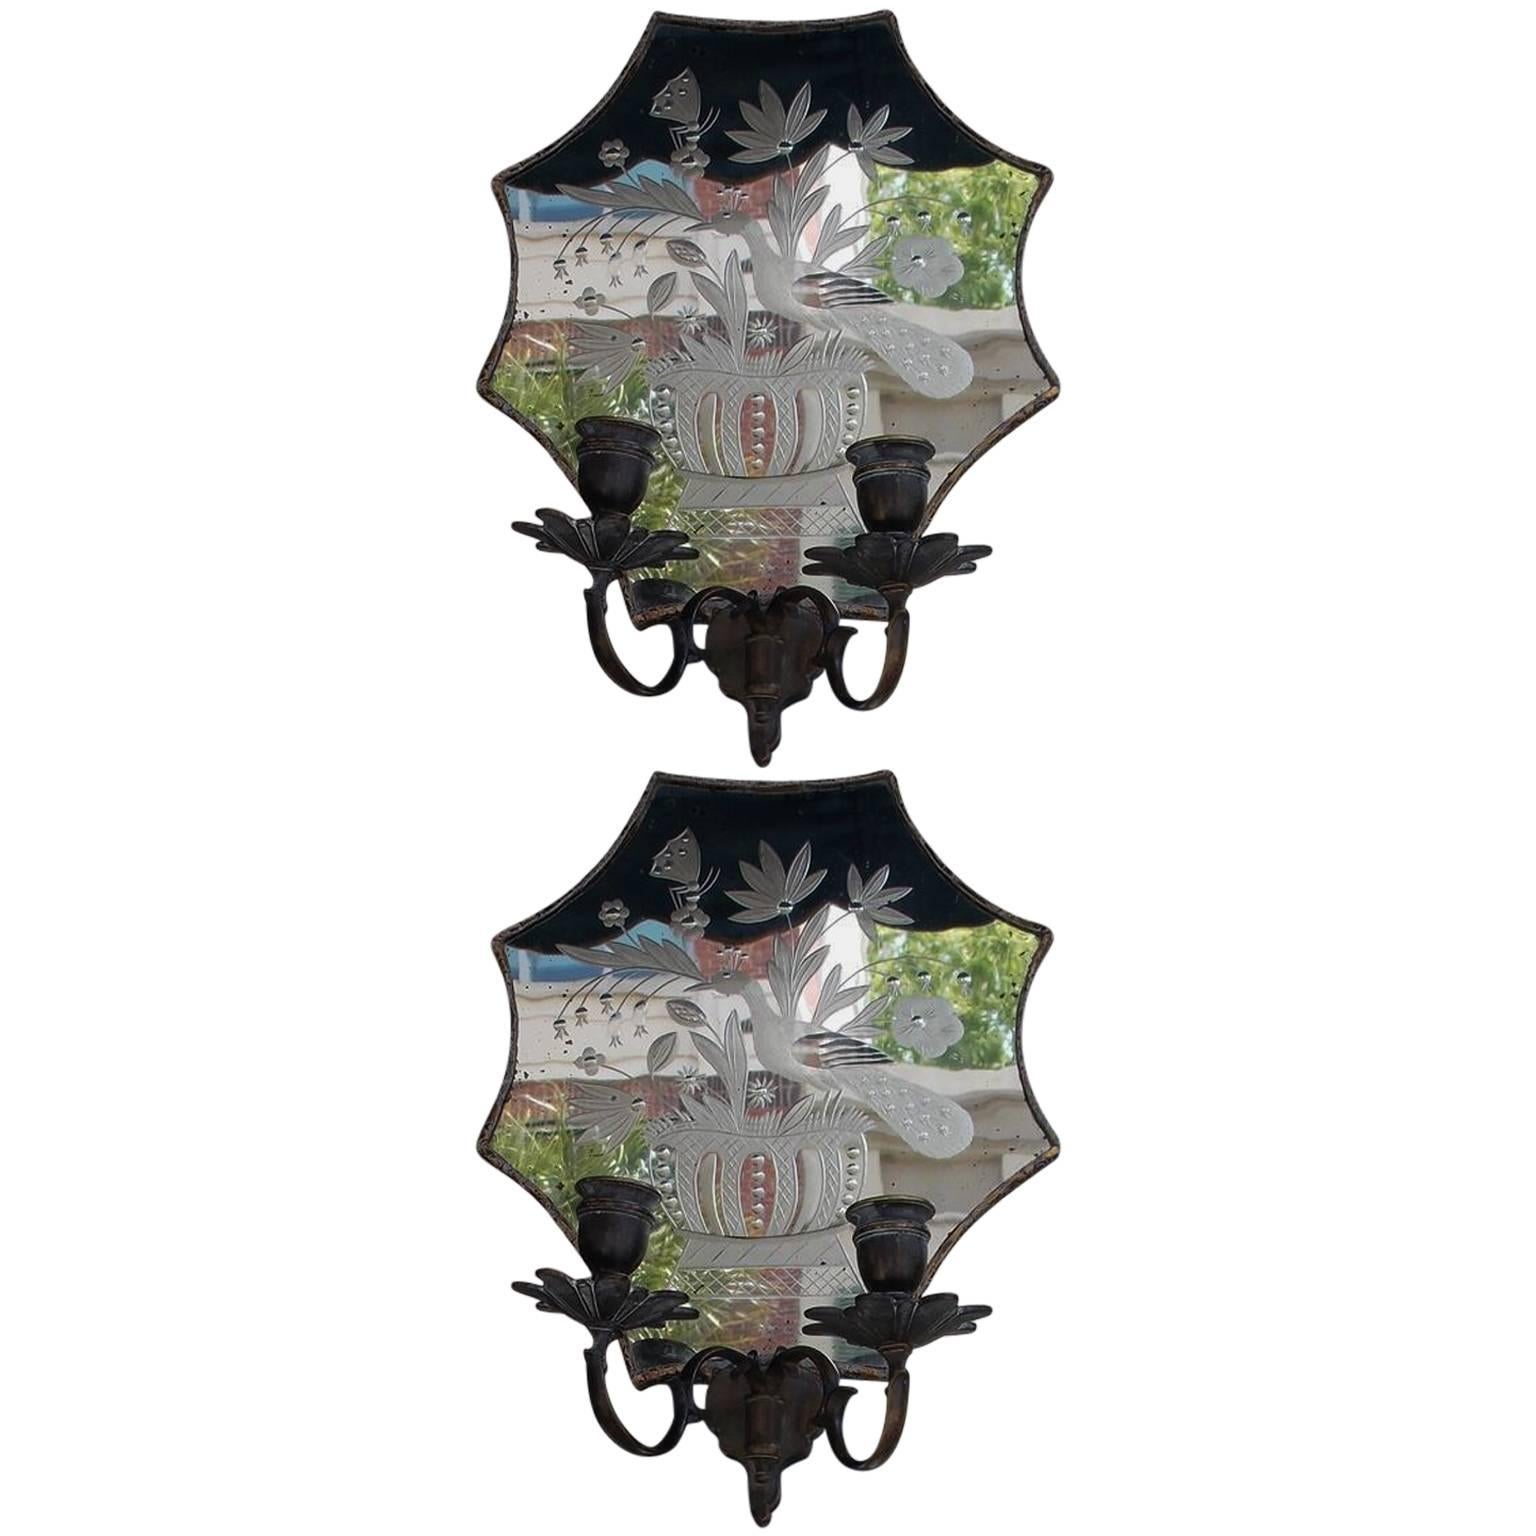 Pair of Venetian Bronze & Decorative Etched Mirrored Wall Sconces, Circa 1800